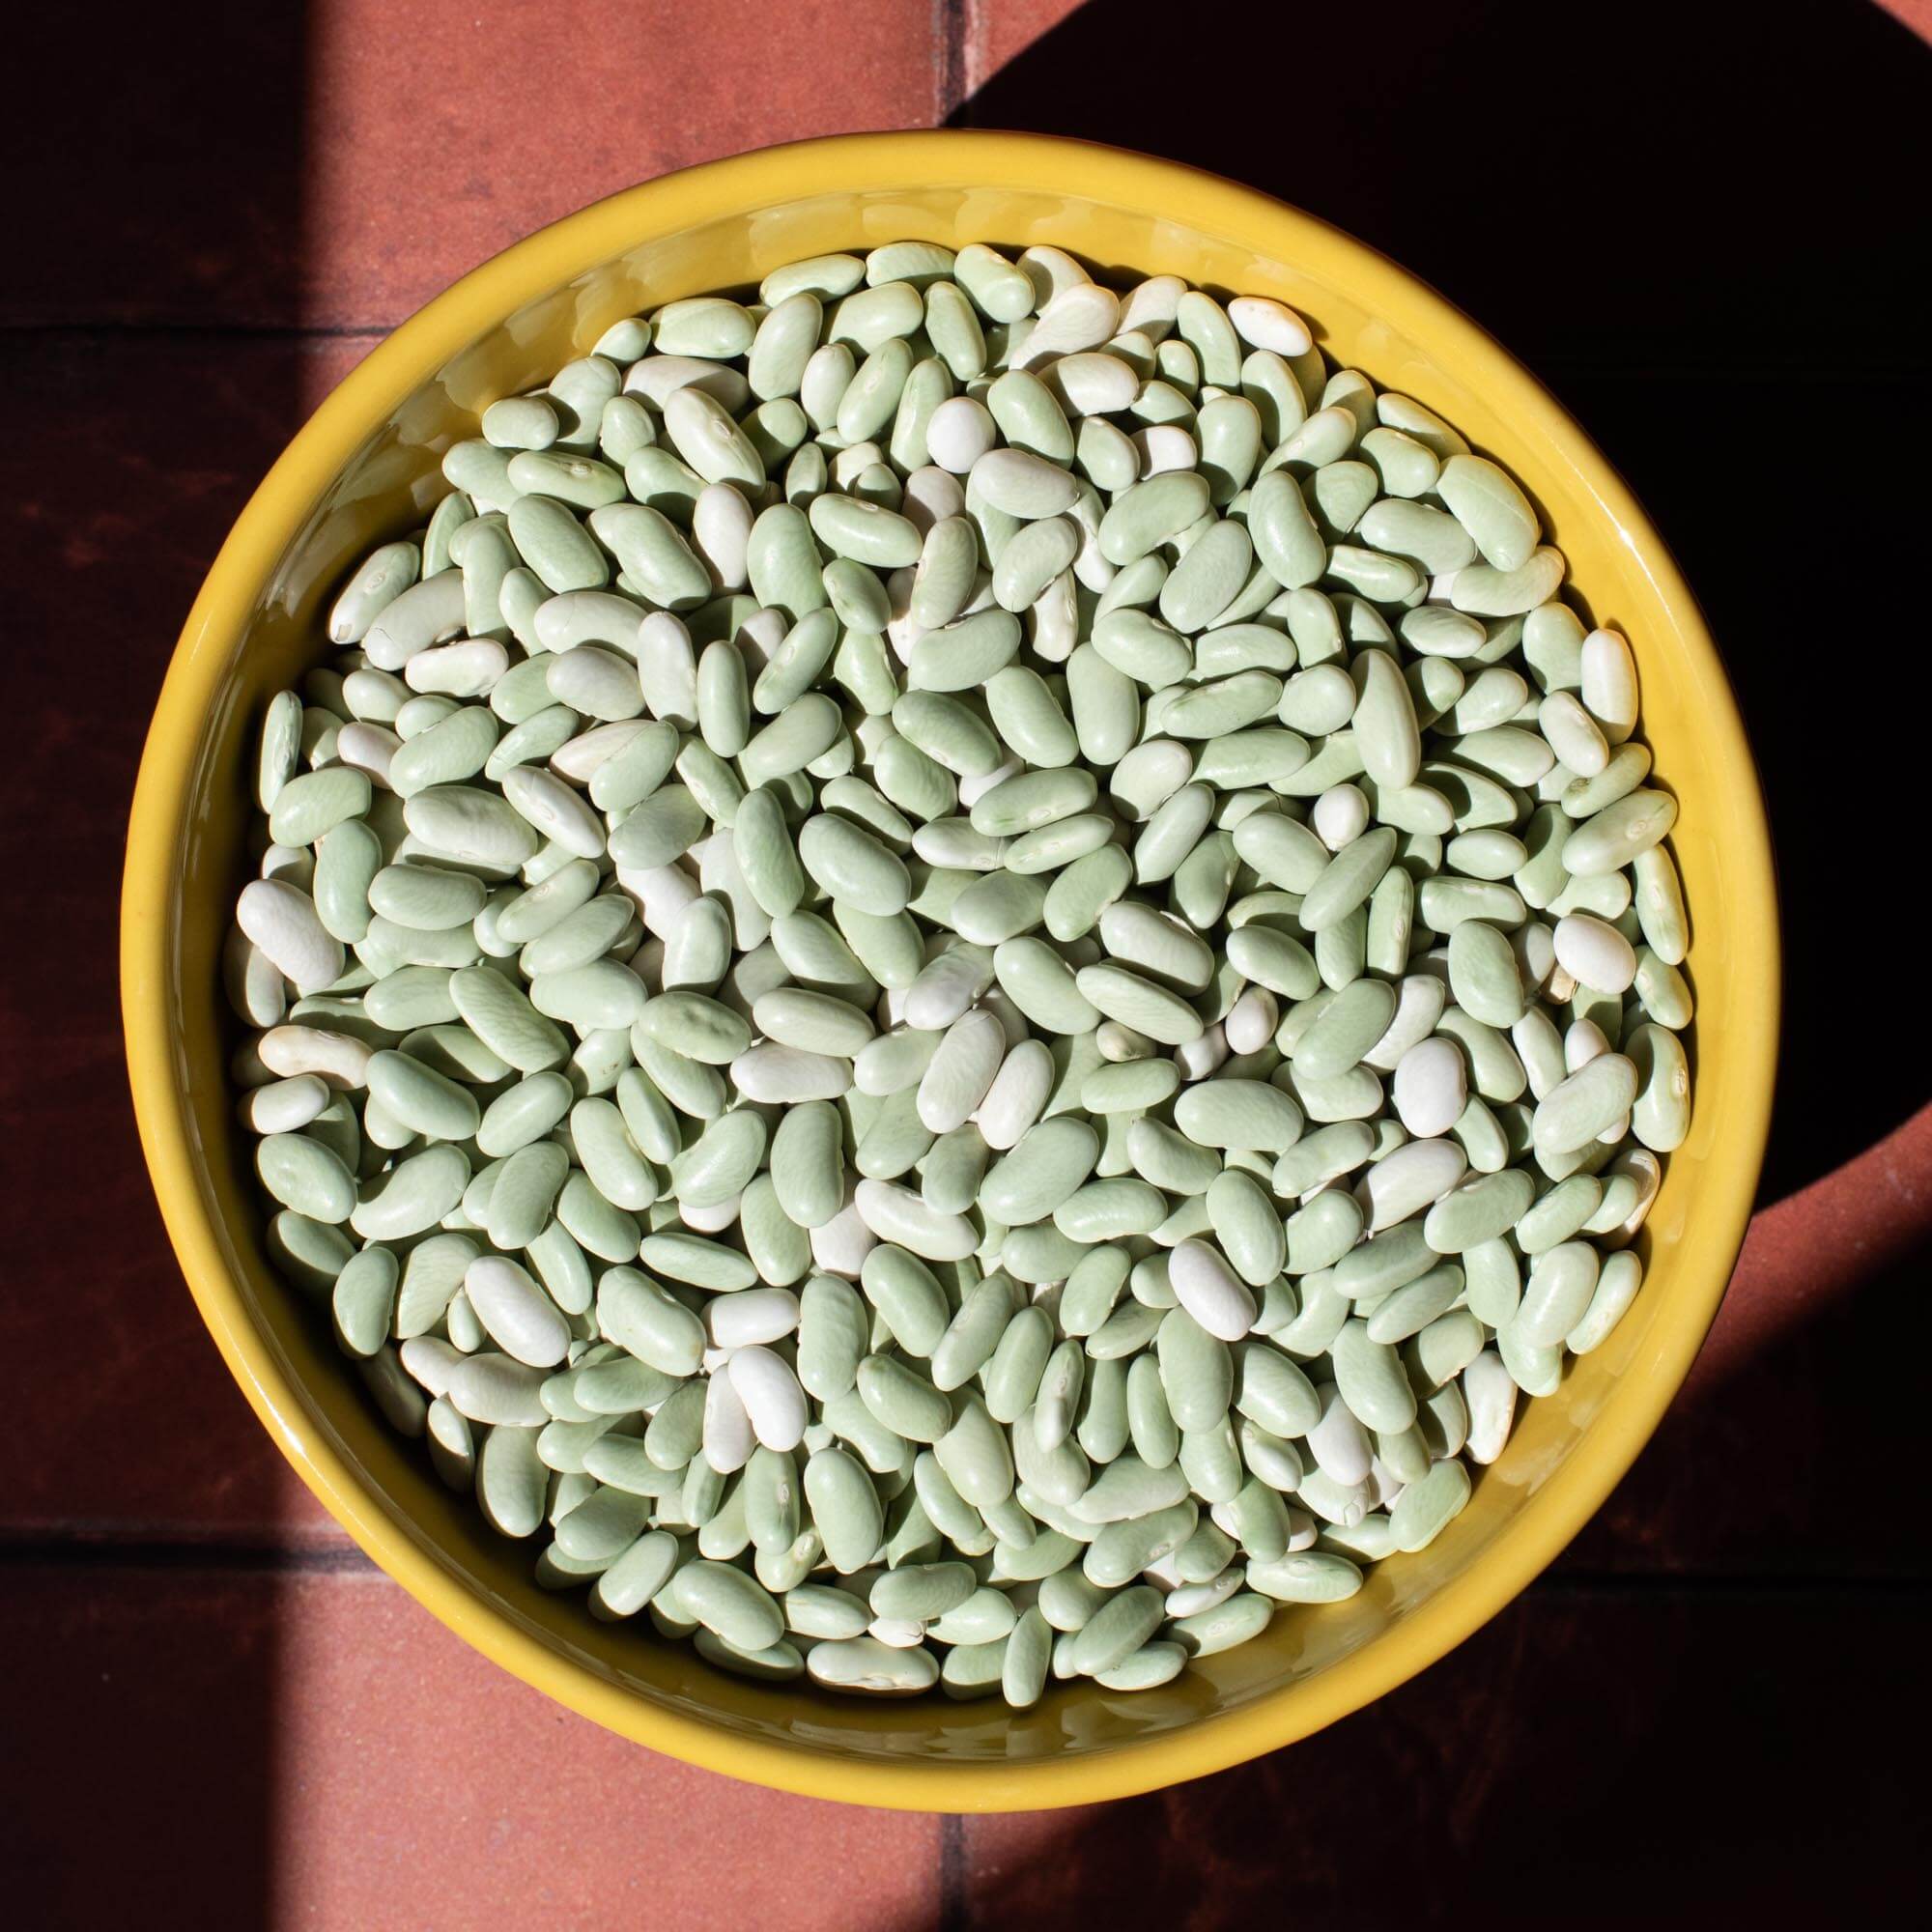 Primary Beans Organic Flageolet beans dried